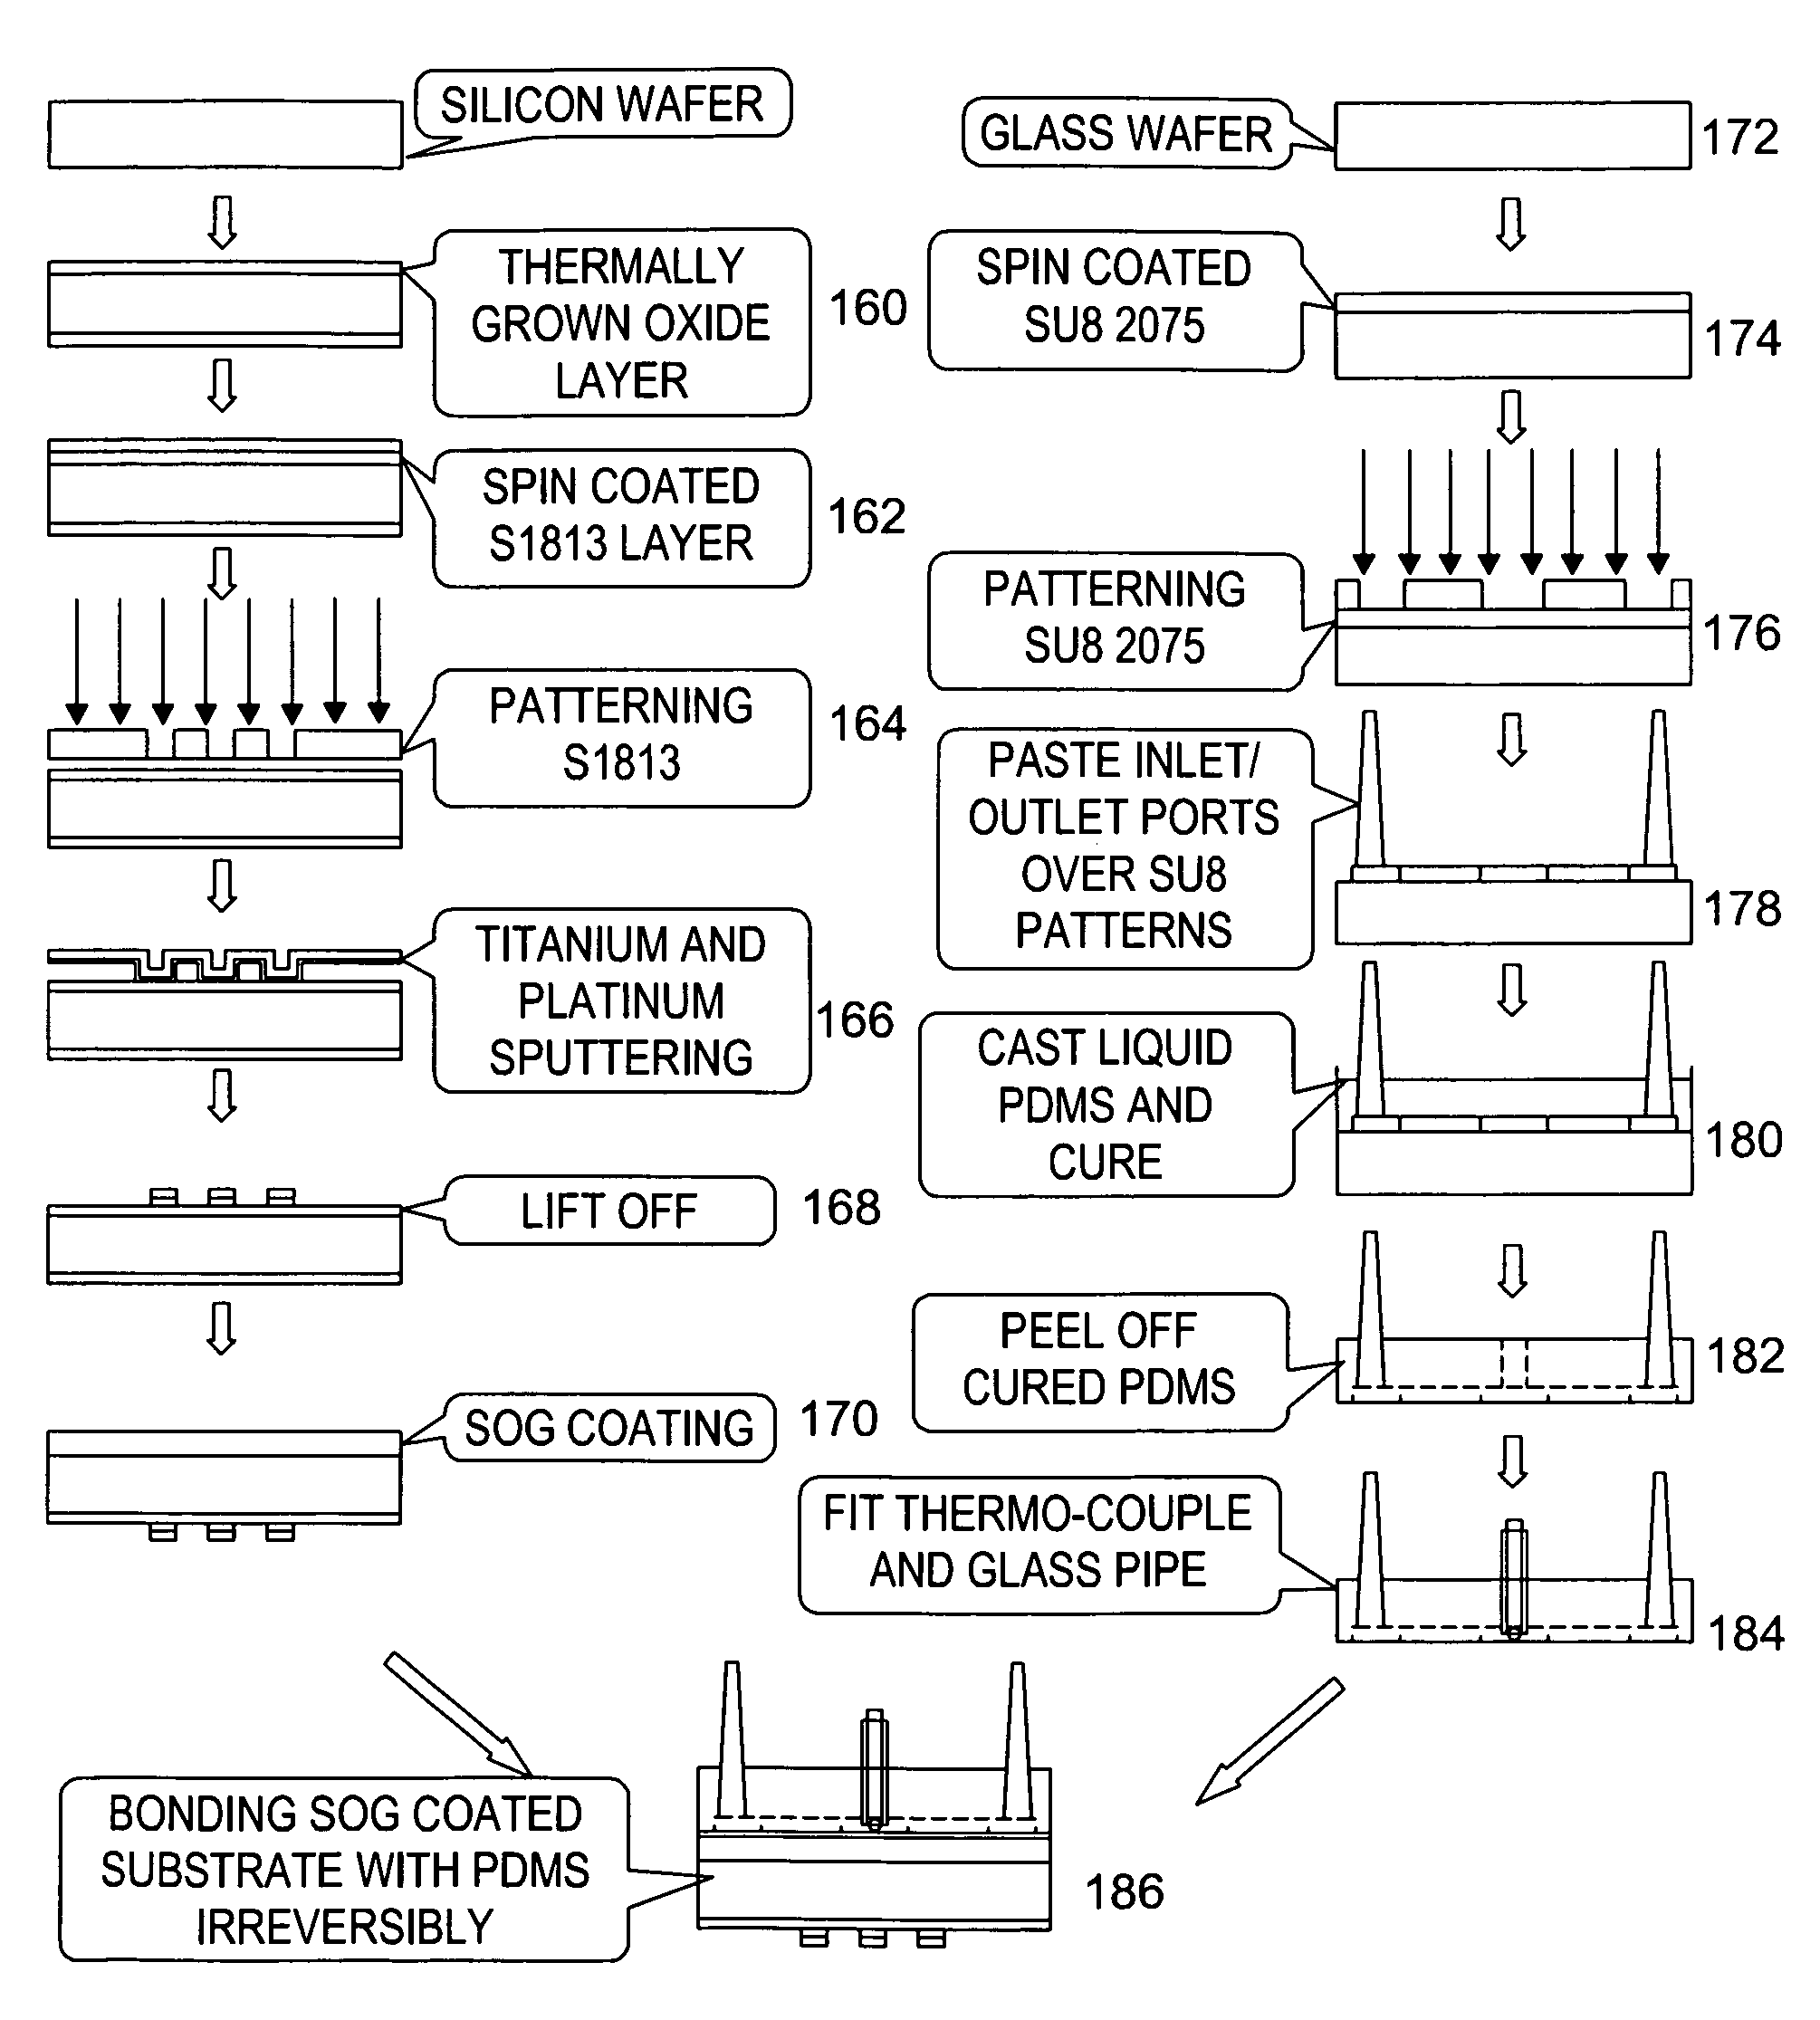 Reusable PCR amplification system and method